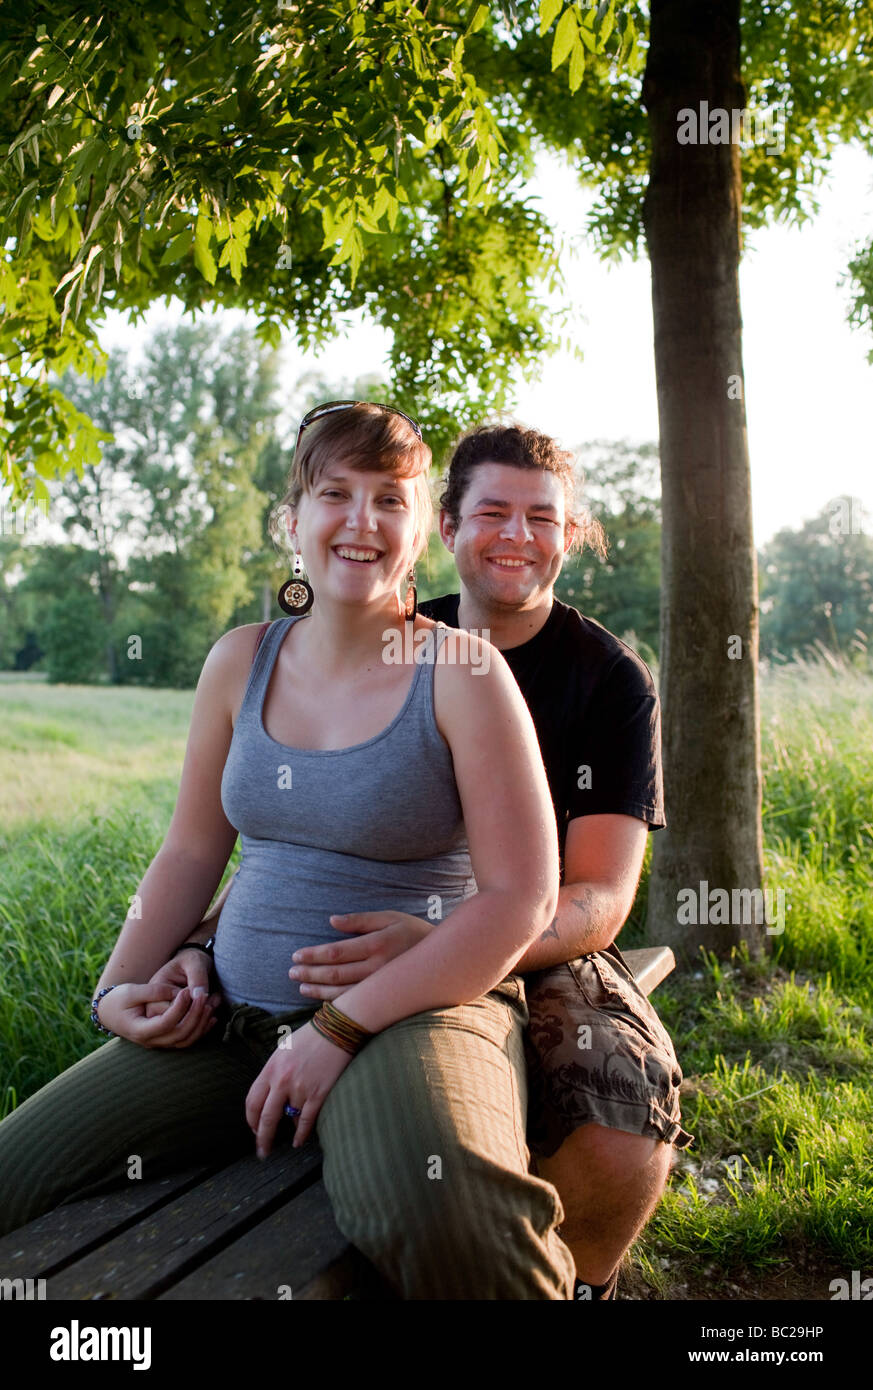 Young pregnand woman with her boyfriend Stock Photo